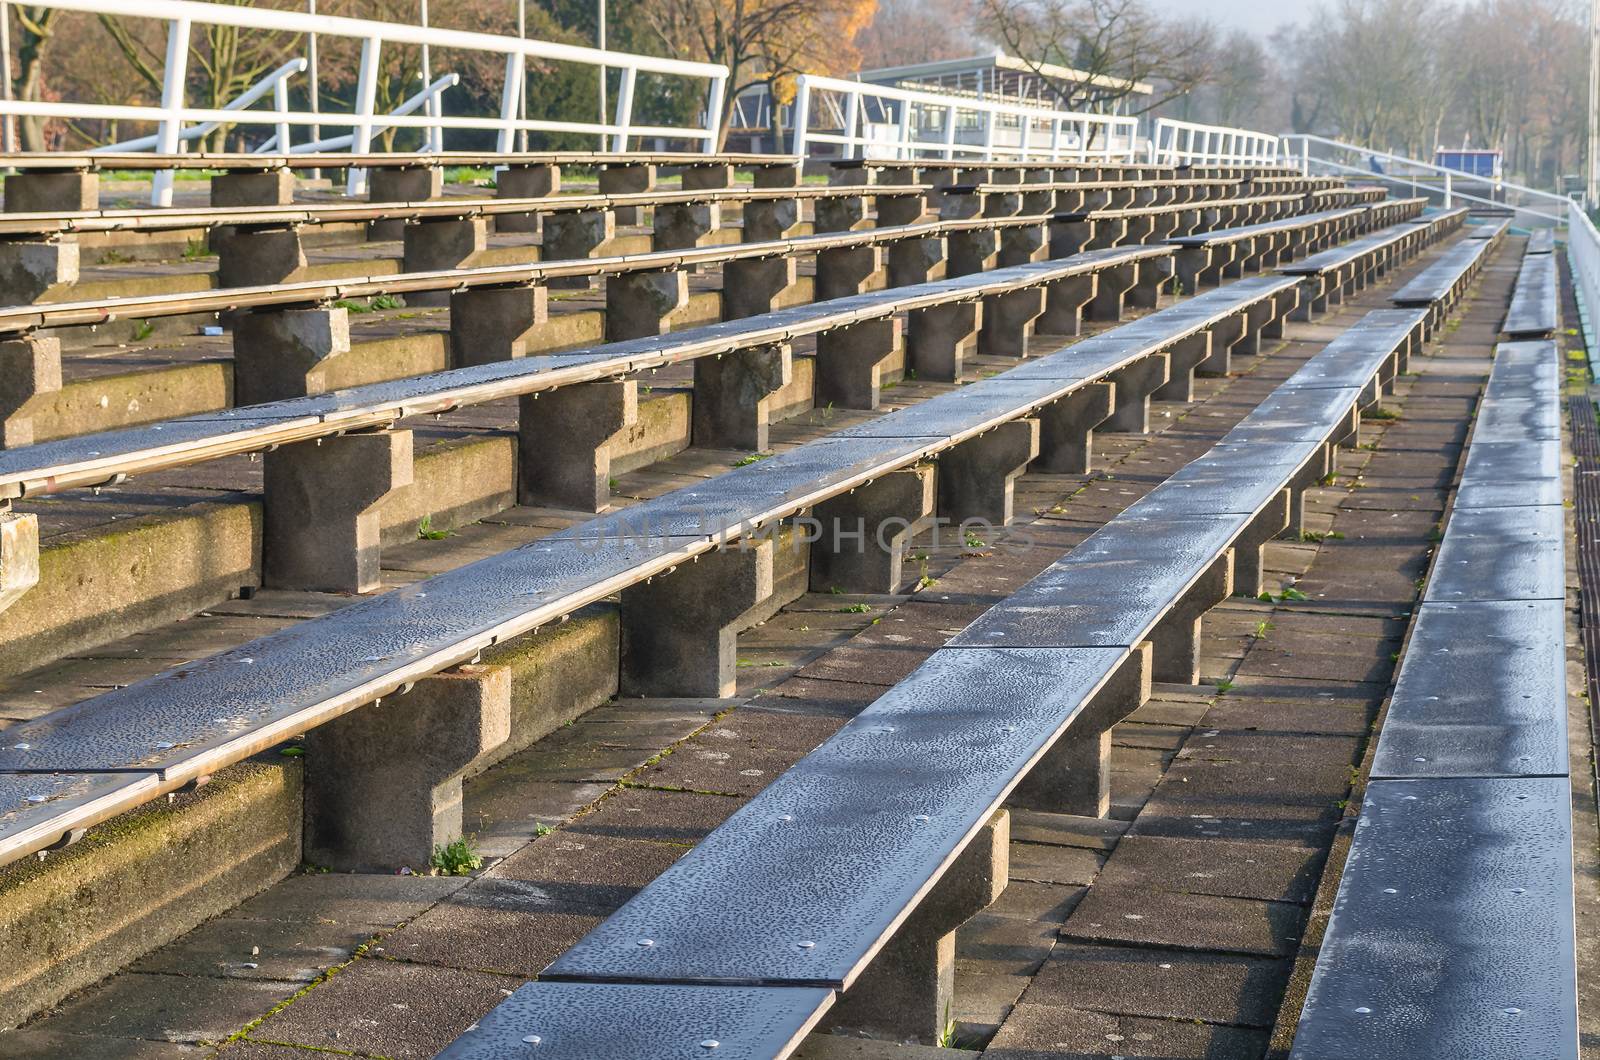 Rows of seats by JFsPic